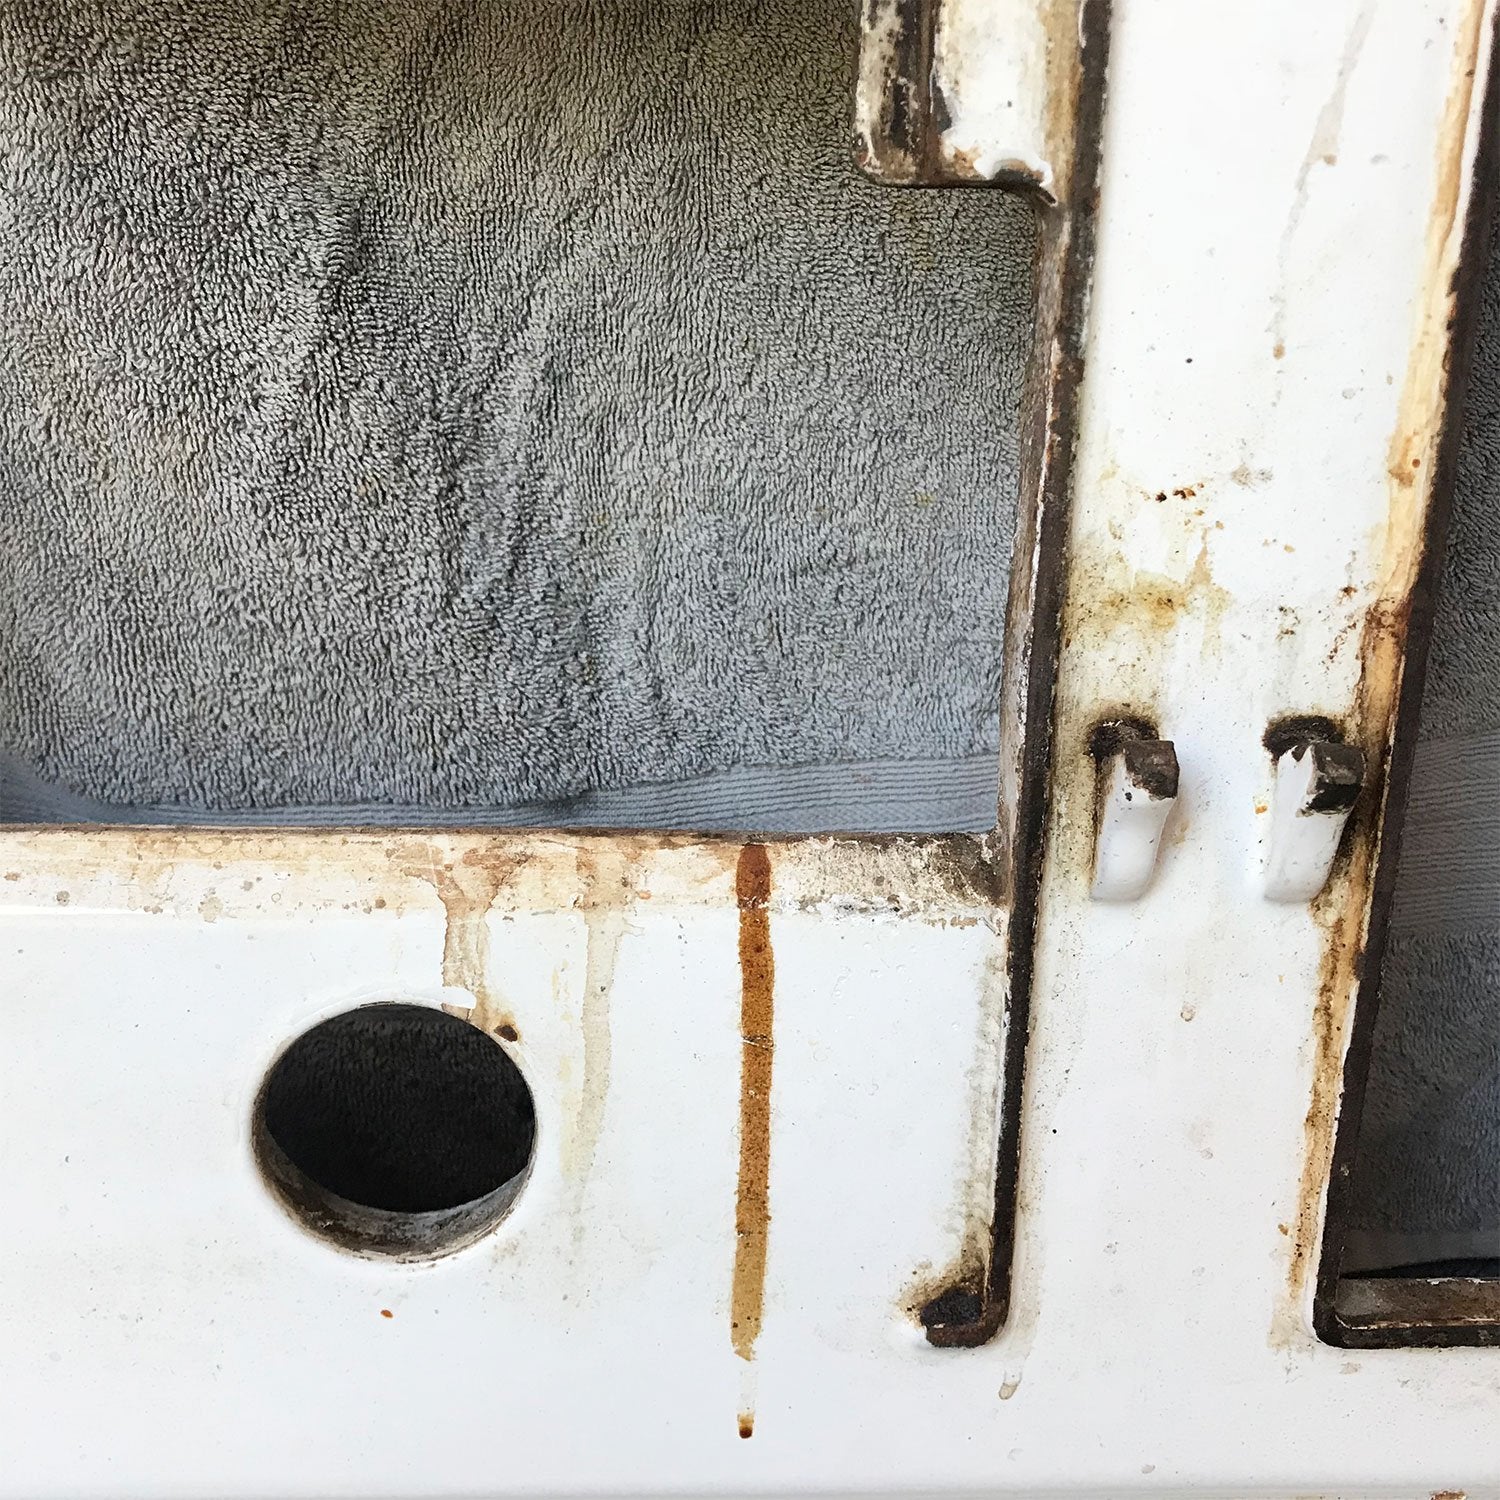 Cleaning really dirty enamel